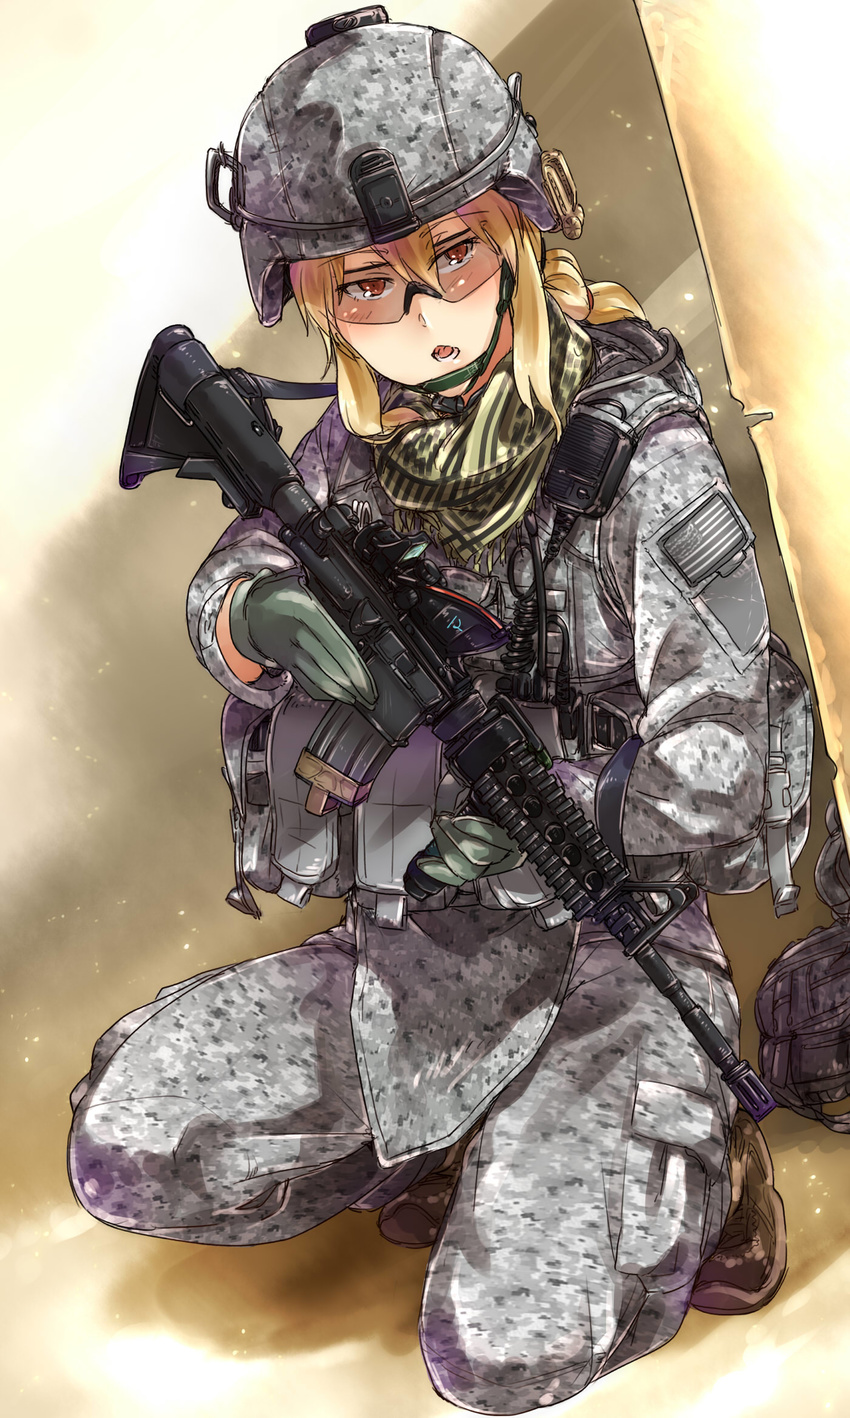 acog acu_(camo) american_flag ar-15 assault_rifle ayyh blonde_hair boots camouflage digital_camouflage emblem glasses gloves gun highres kneeling load_bearing_vest m4_carbine military open_mouth original plate_carrier ponytail red_eyes rifle safety_glasses scarf solo stanag_magazine trigger_discipline us_army vertical_foregrip weapon